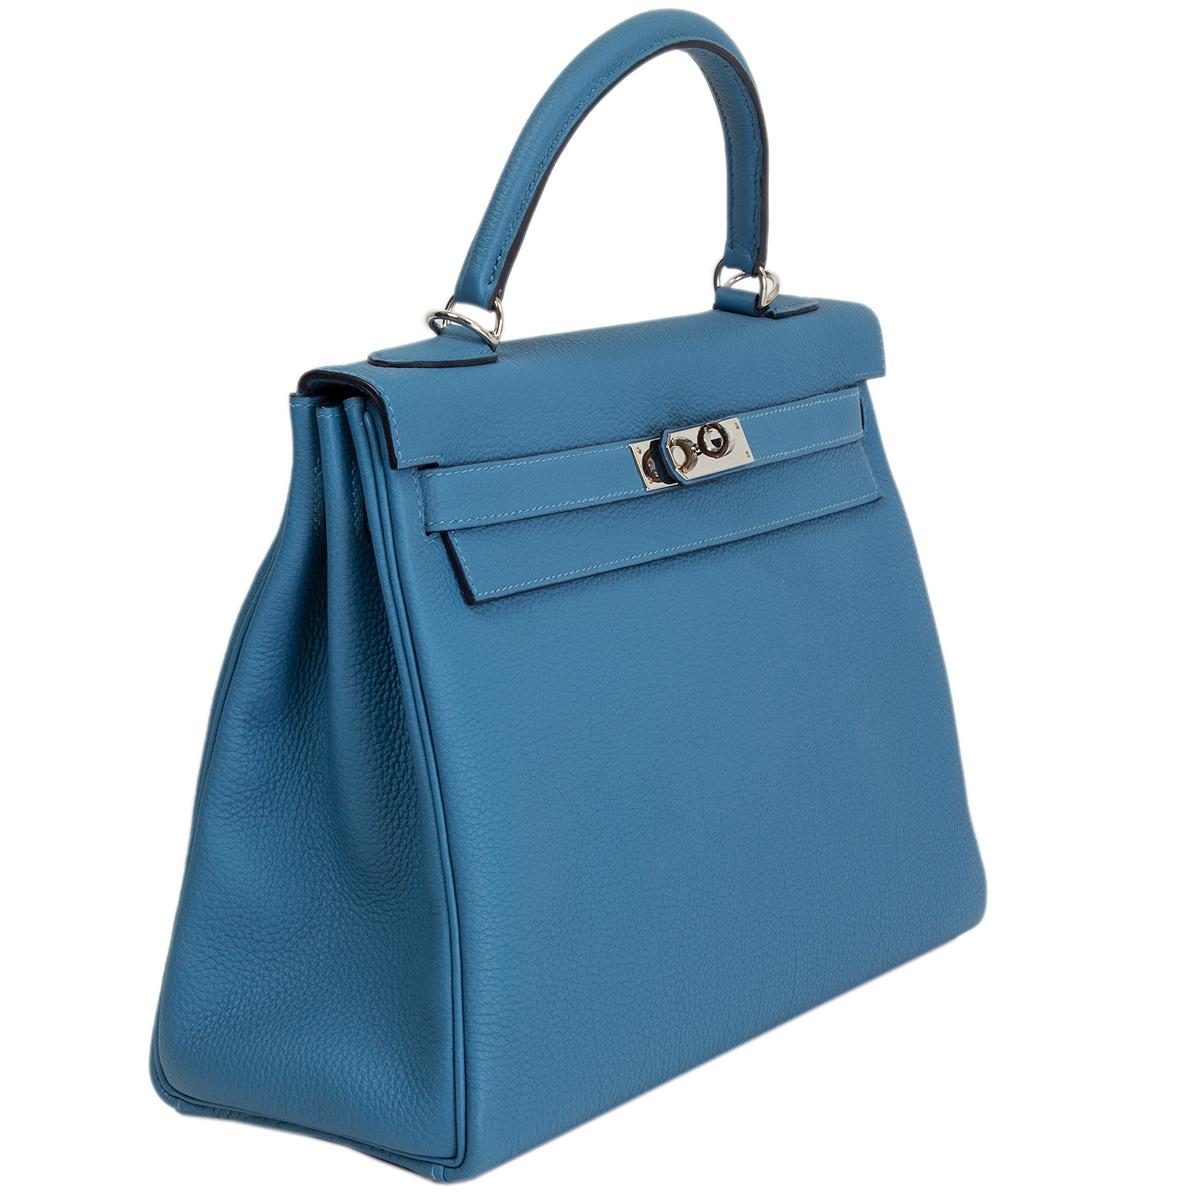 100% authentic Hermès Kelly II 32 Retourne bag in Azur blue Veau Togo leather with palladium hardware. Lined in Chevre (goat skin) with an open pocket against the front and a zipper pocket against the back. Has never been used and kept in the box -